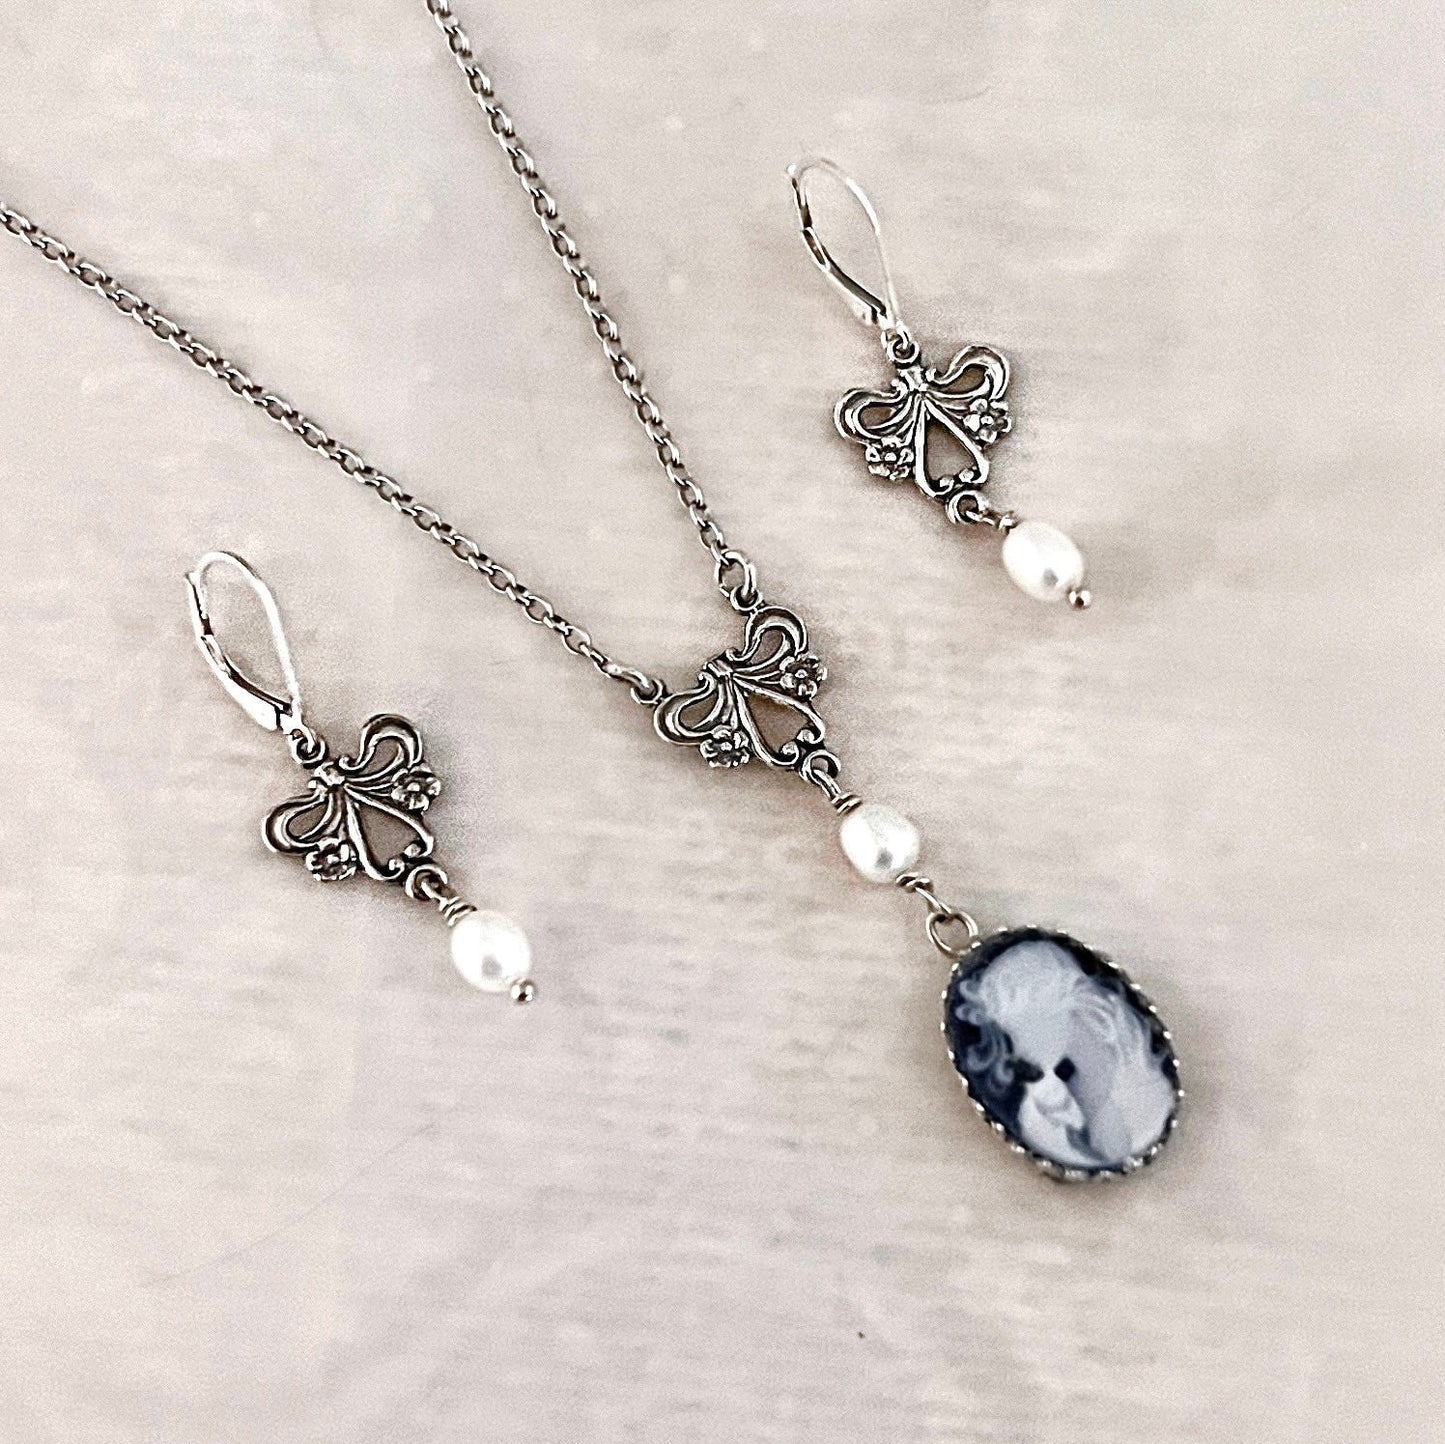 Victorian Cat Cameo Jewelry Set, Adjustable Pearl Necklace, Sterling Silver Cat Necklace, Anniversary Gift for Wife,  Gifts